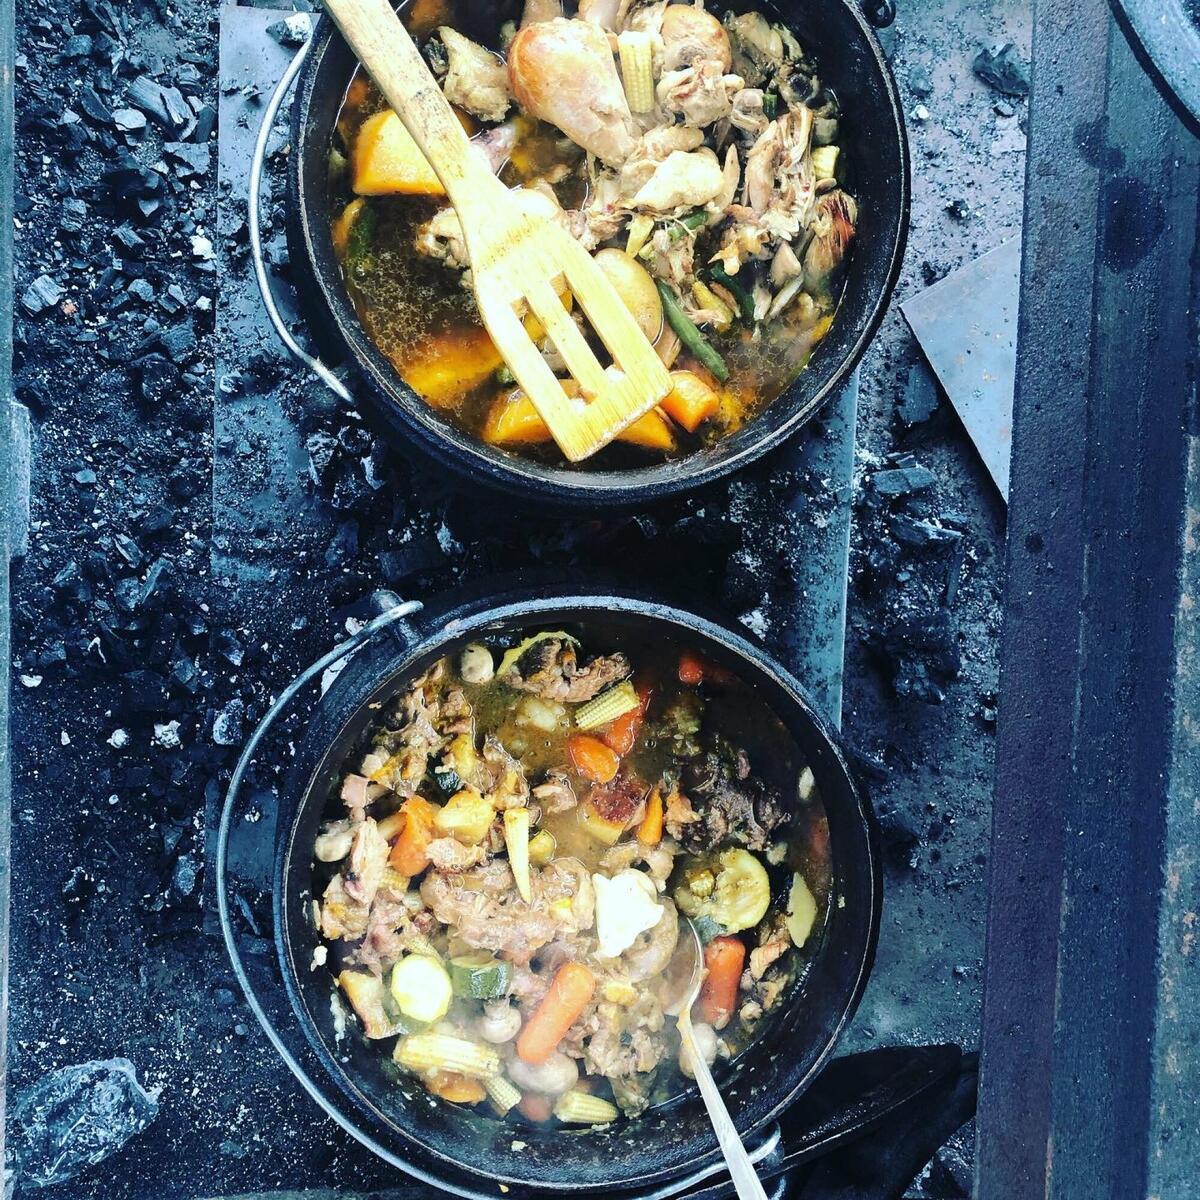 Curries cooked on open fires